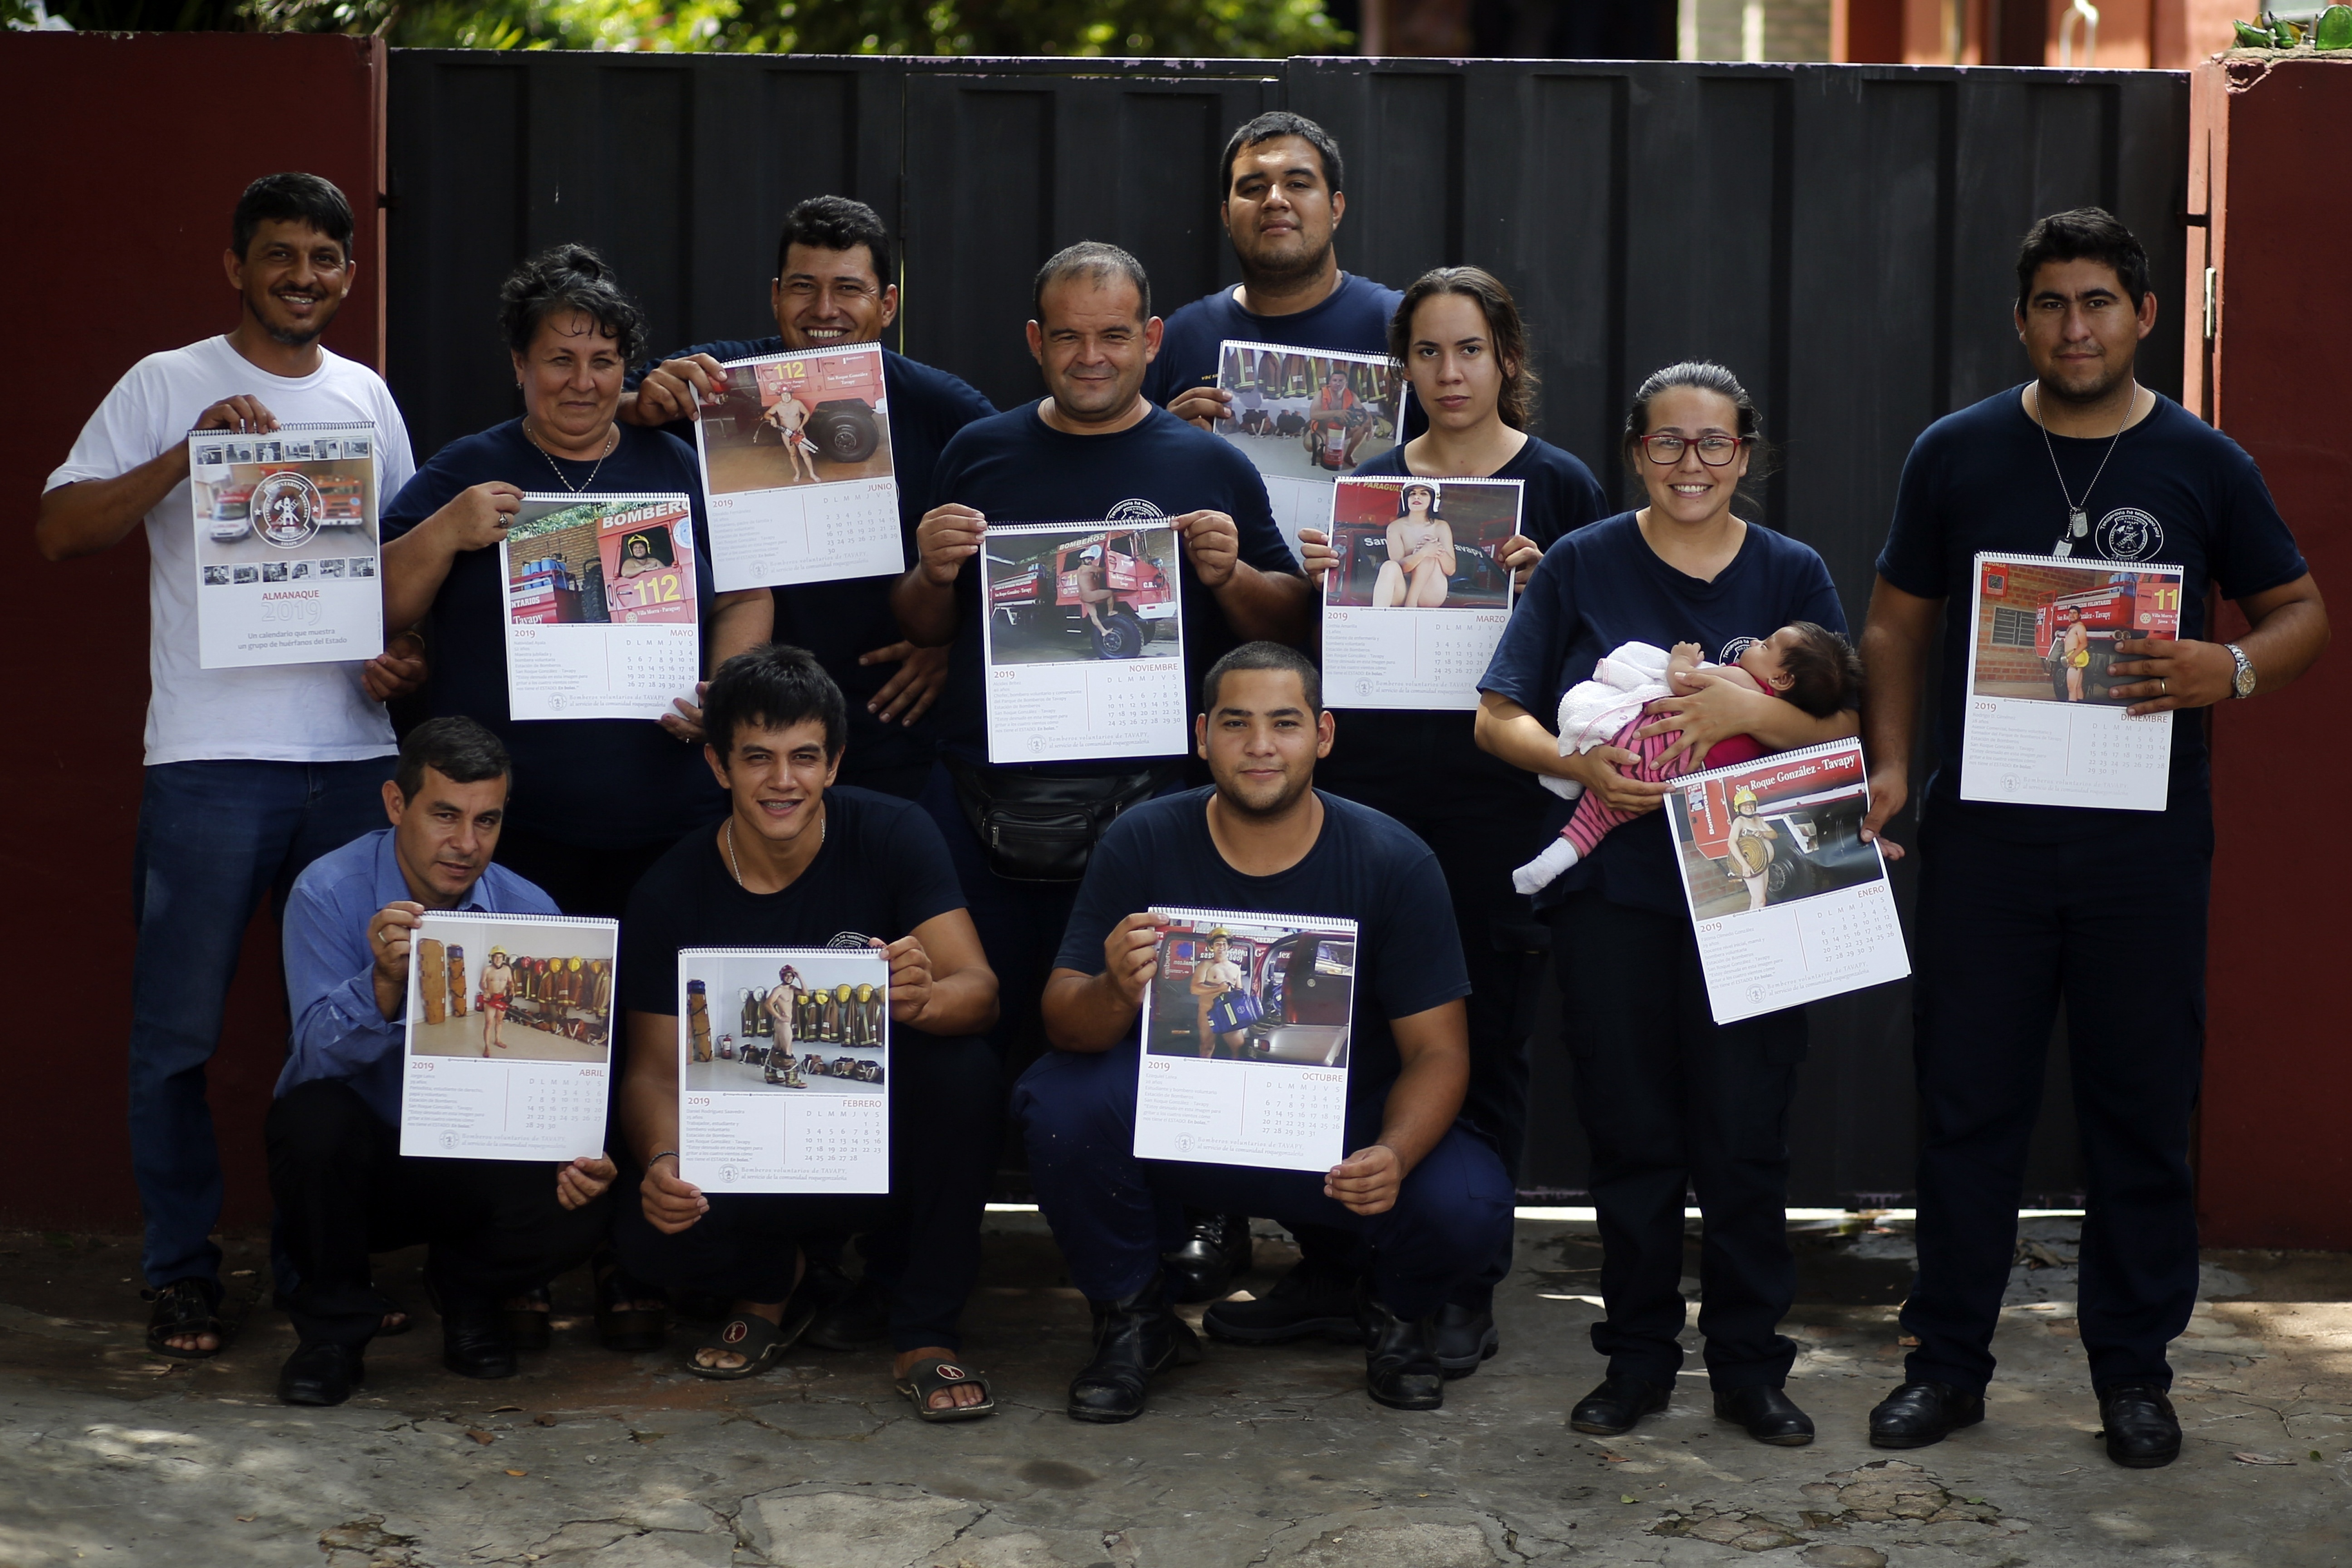 Paraguayan firefighters get naked in calendar to raise funds, protest neglect